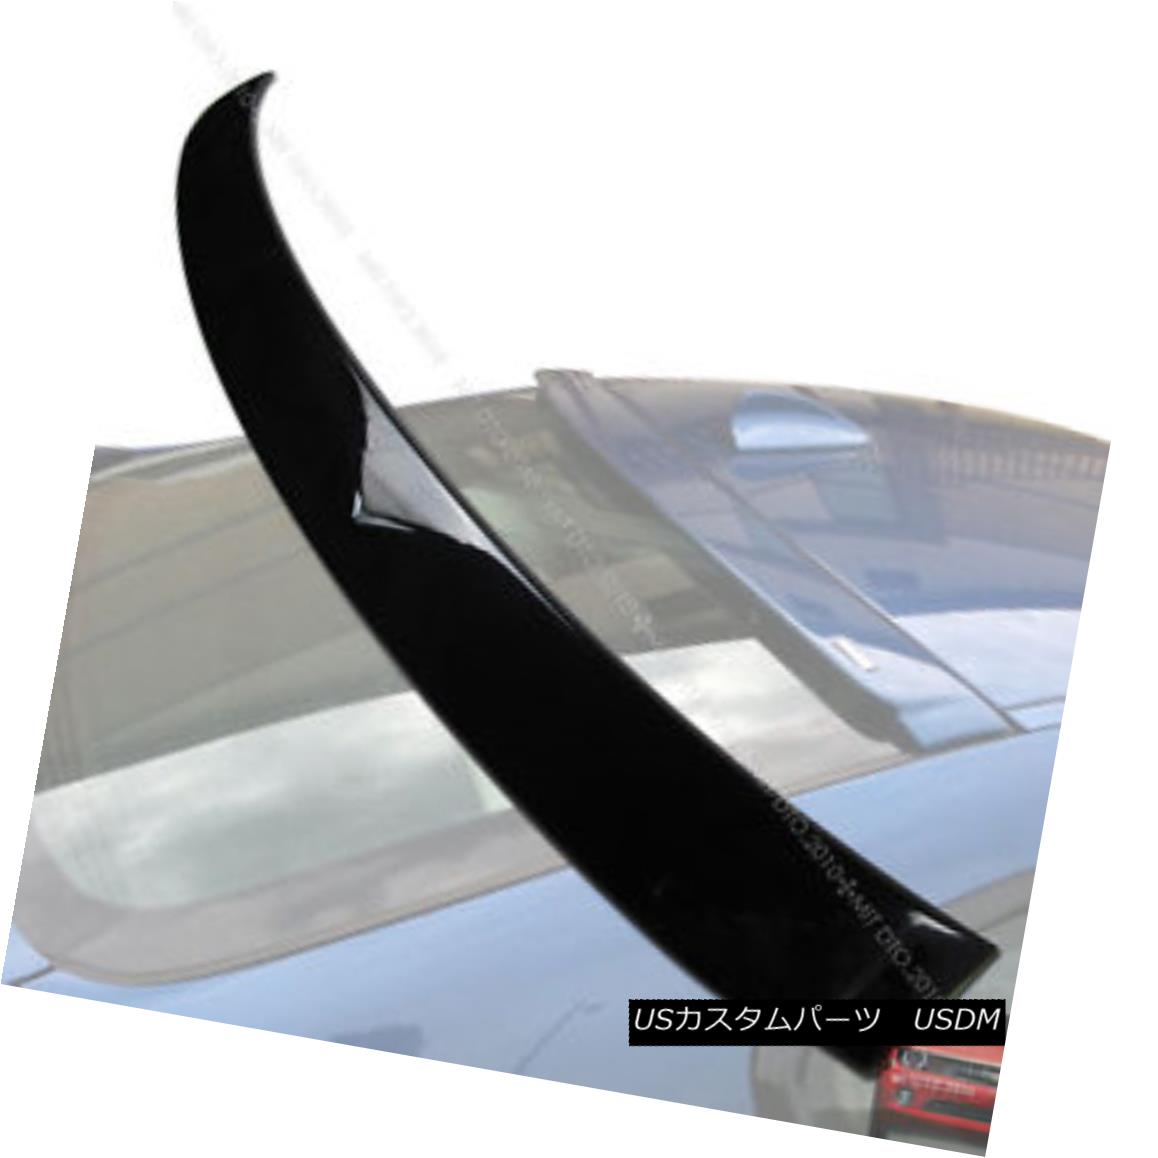 ѡ 335is For BMW E92 3er 07 11 A Type Rear Roof Spoiler Wing Paint A52 Gray Coupe 335is for BMW E92 3er 07 11ץꥢ롼եݥ顼󥰥ڥA52졼